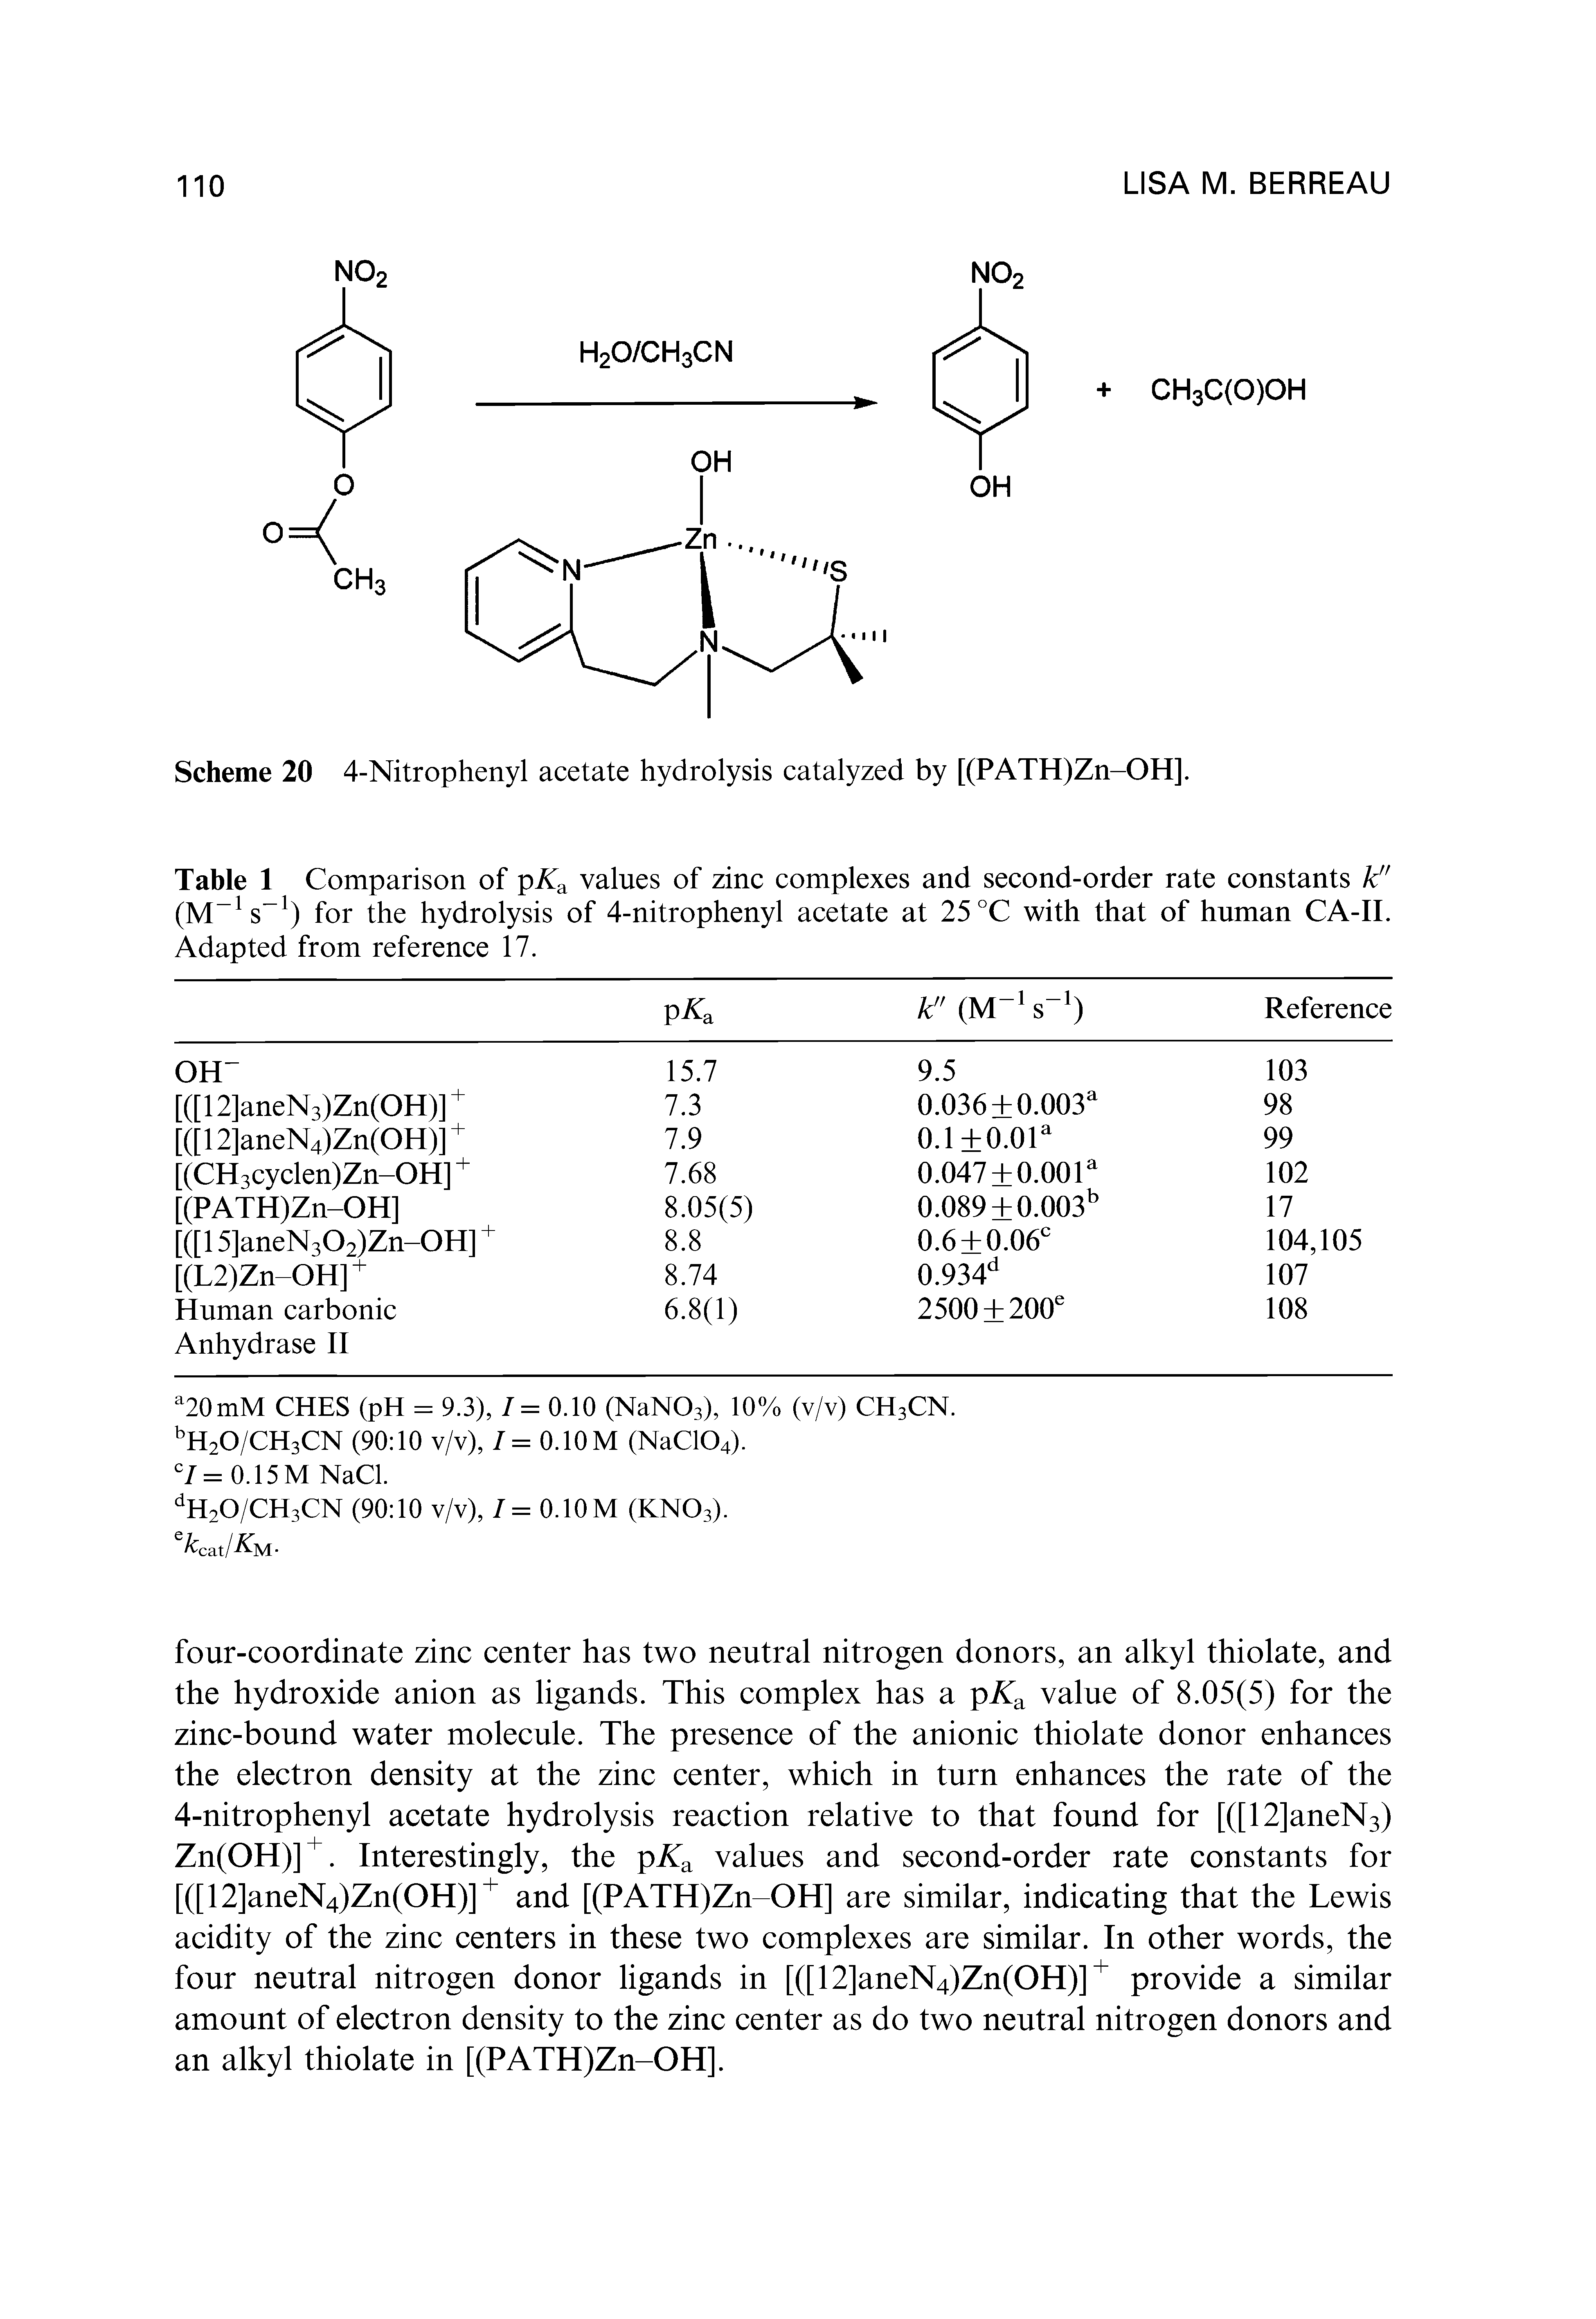 Table 1 Comparison of pKa values of zinc complexes and second-order rate constants k" (M 1s 1) for the hydrolysis of 4-nitrophenyl acetate at 25 °C with that of human CA-II. Adapted from reference 17.